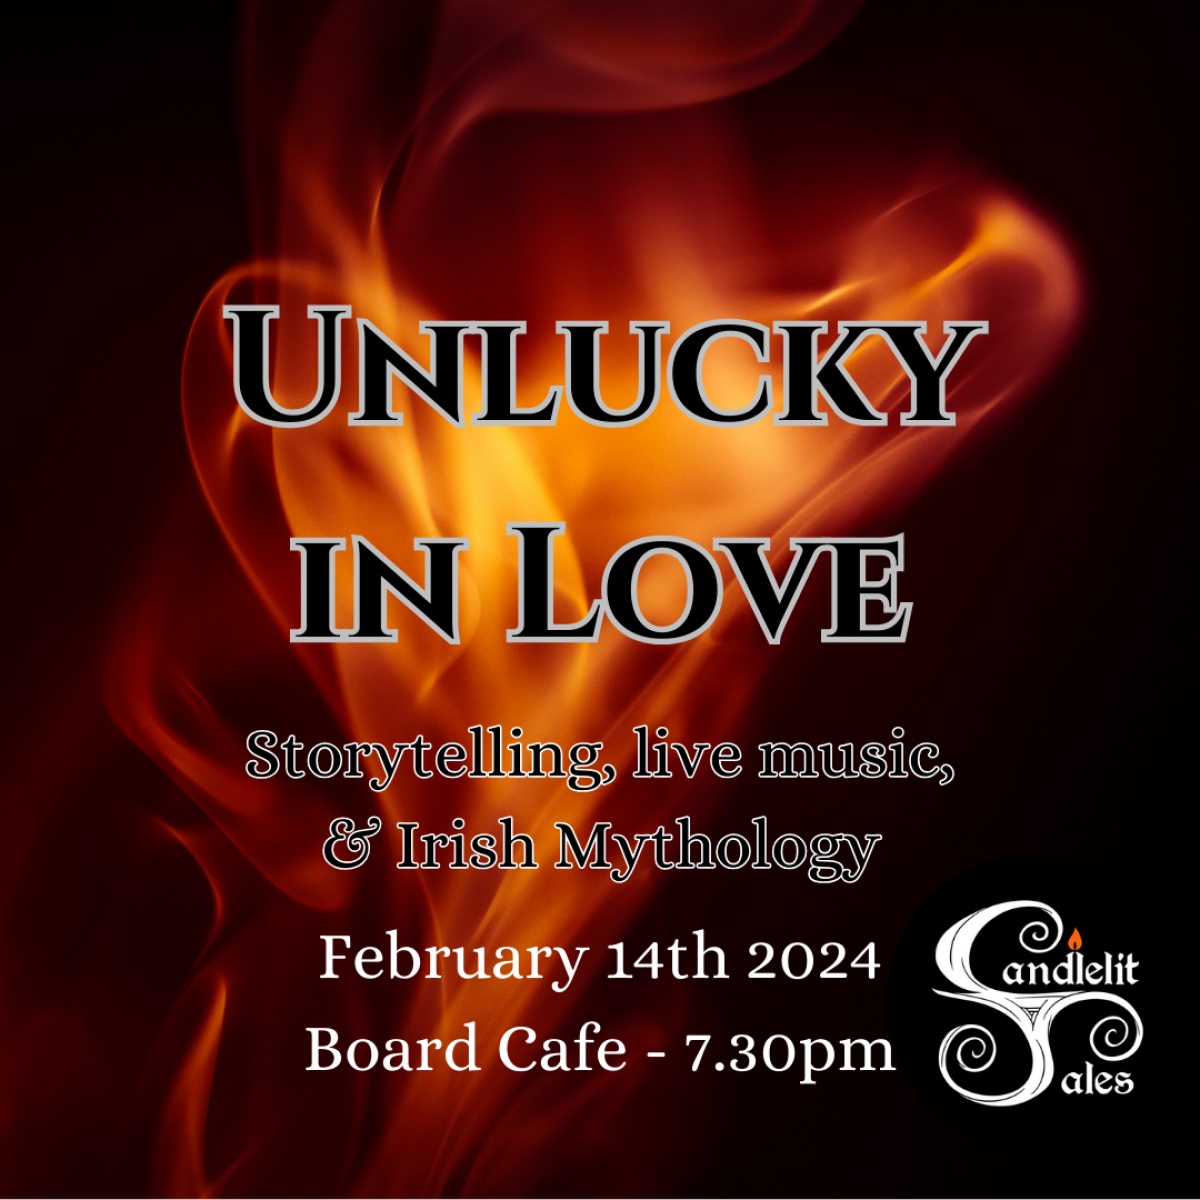 mBooked.com, Unlucky in Love, Dublin 8, Candlelit Tales